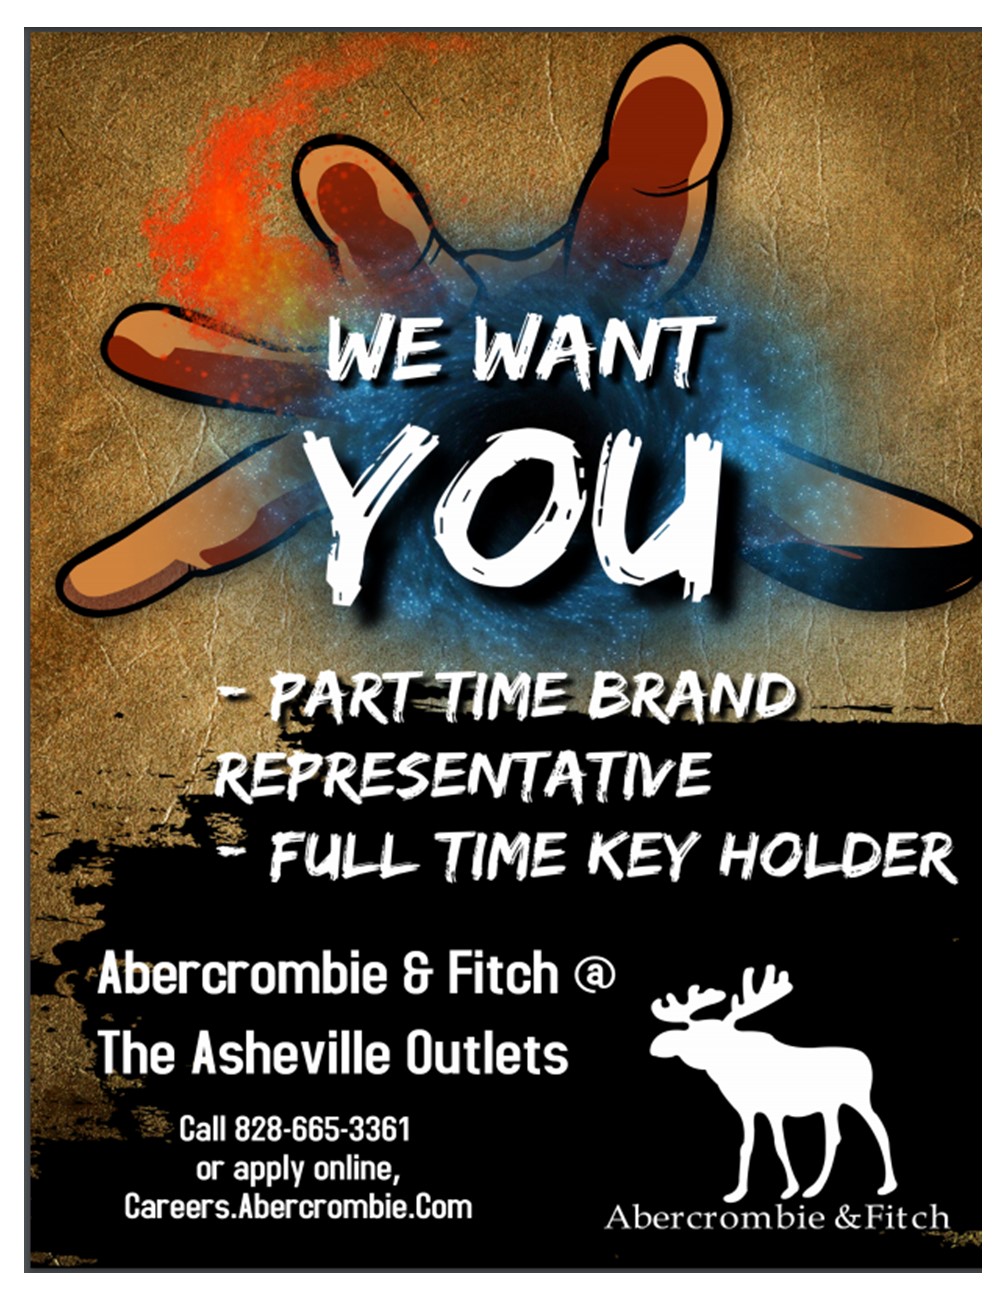 Abercrombie & Fitch @ The Asheville Outlets is hiring!